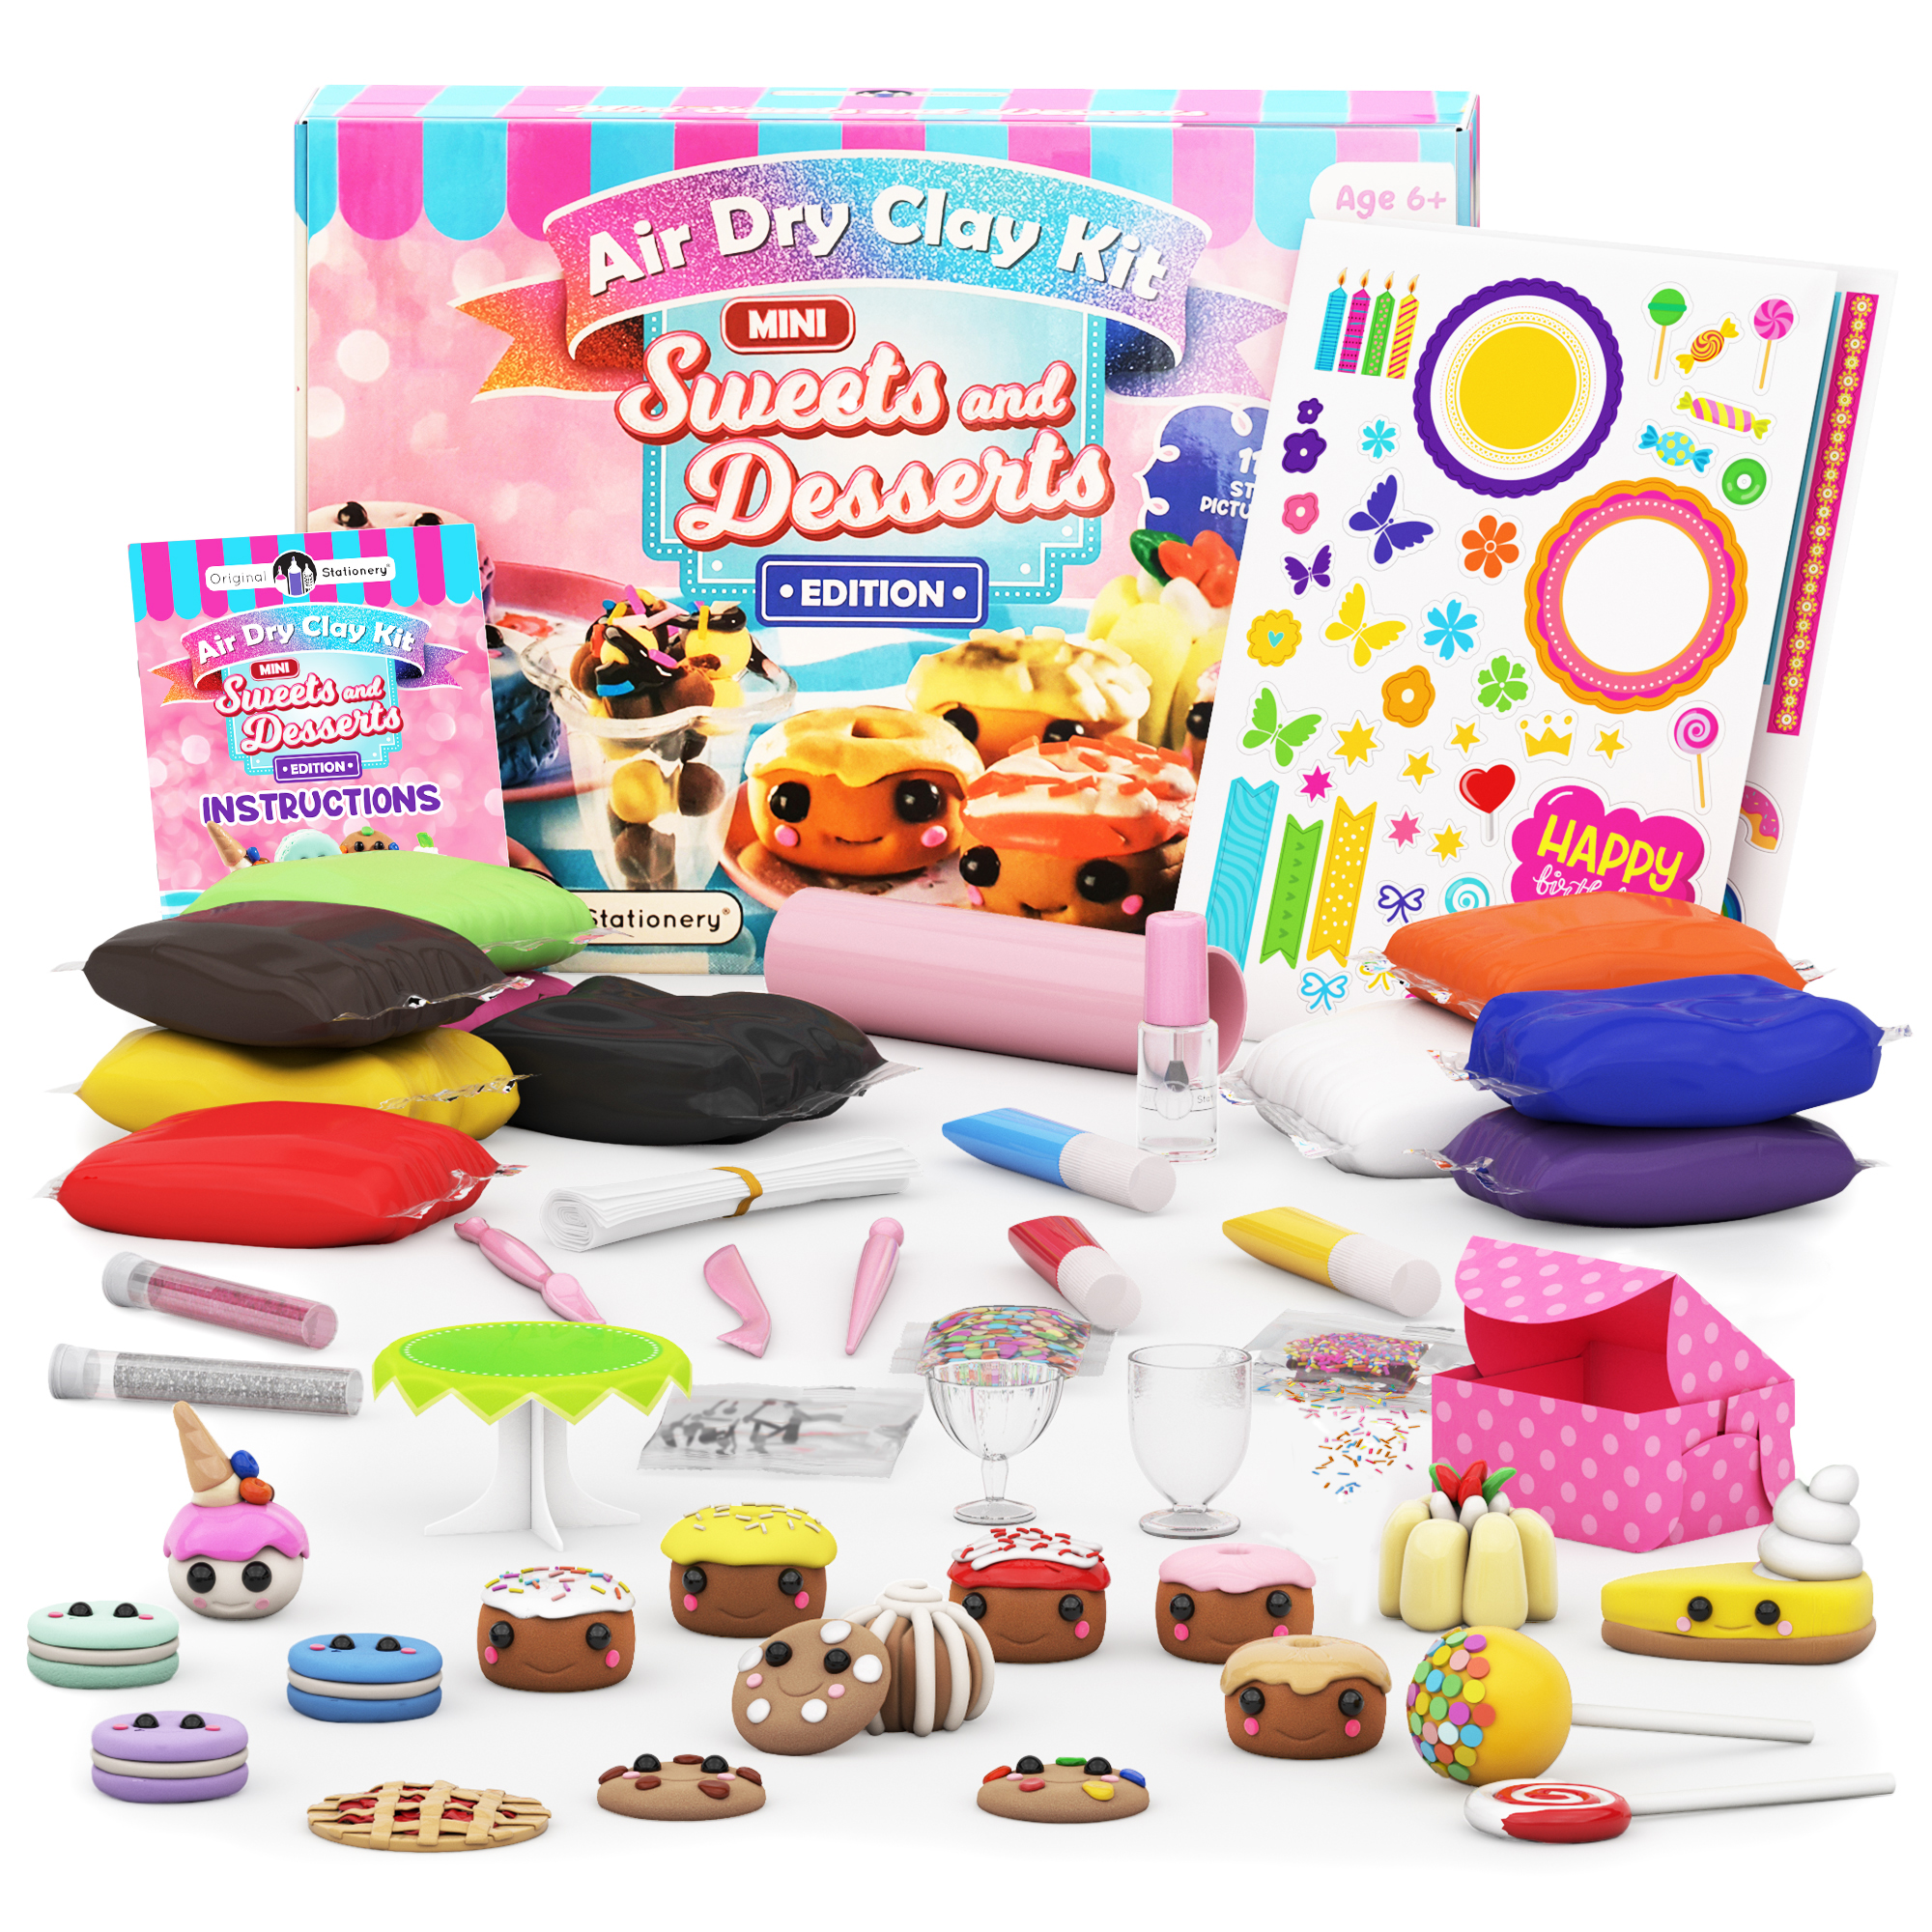 Original Stationery Mini World Food Air Dry Clay Kit with Modeling